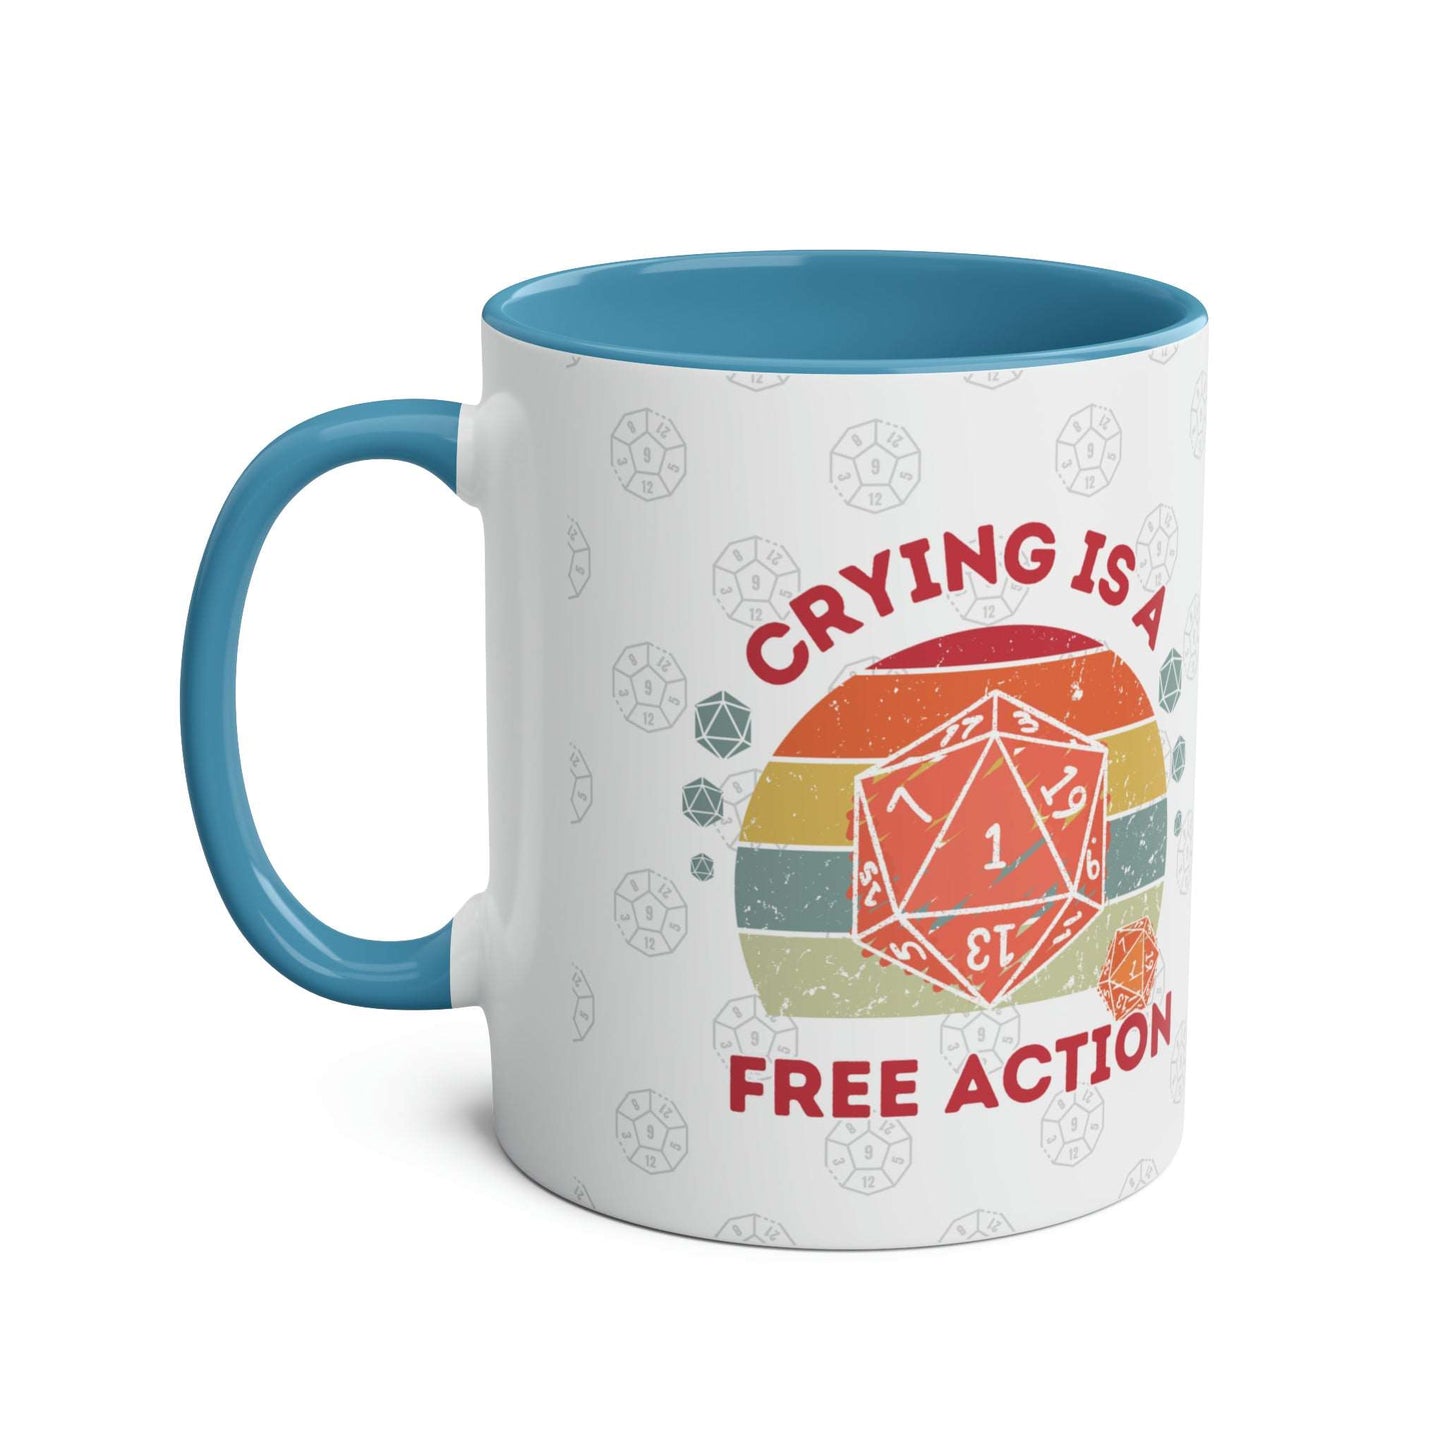 Dnd Mug Crying is a Free Action Coffee Cup, Great Gift for DM or Dungeons, Dragons Players with Nat1 D20 Retro Design